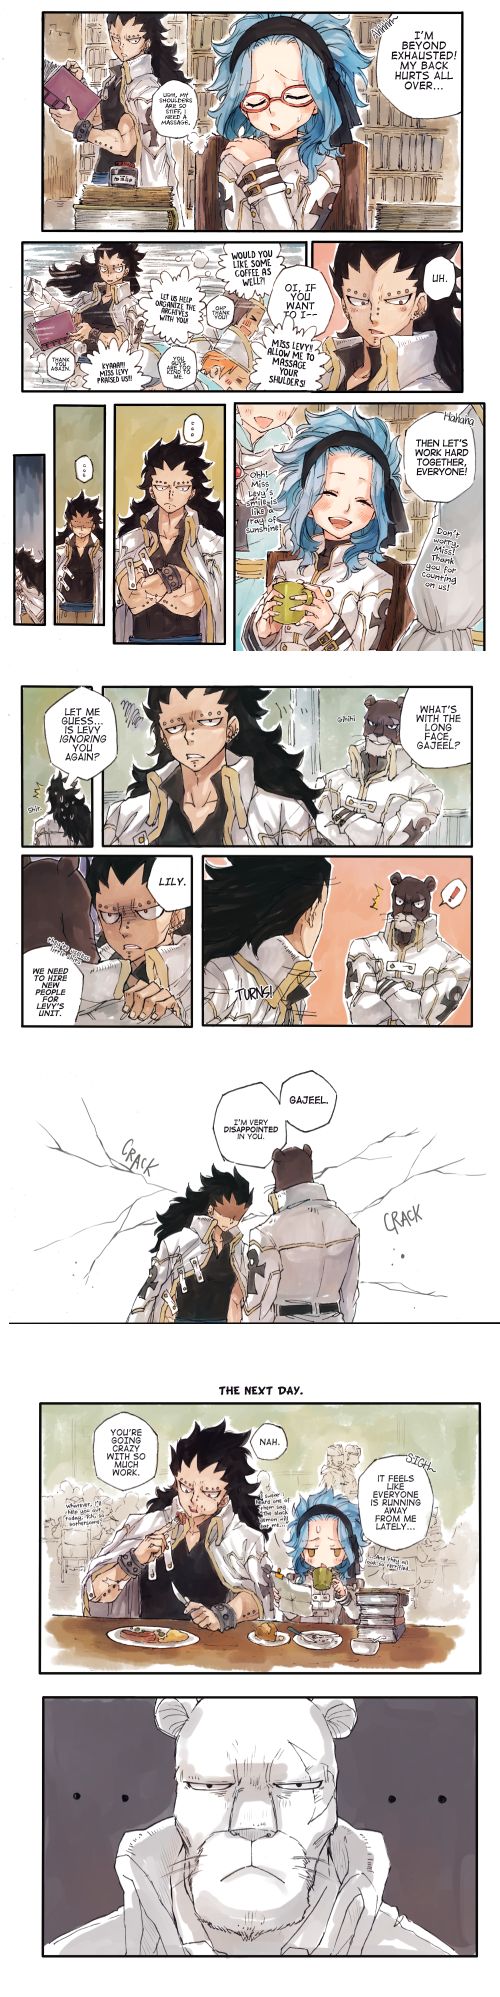 Gajeel, Levy, Lily. The look on Lily's face he's just like wow Gajeel just wow.